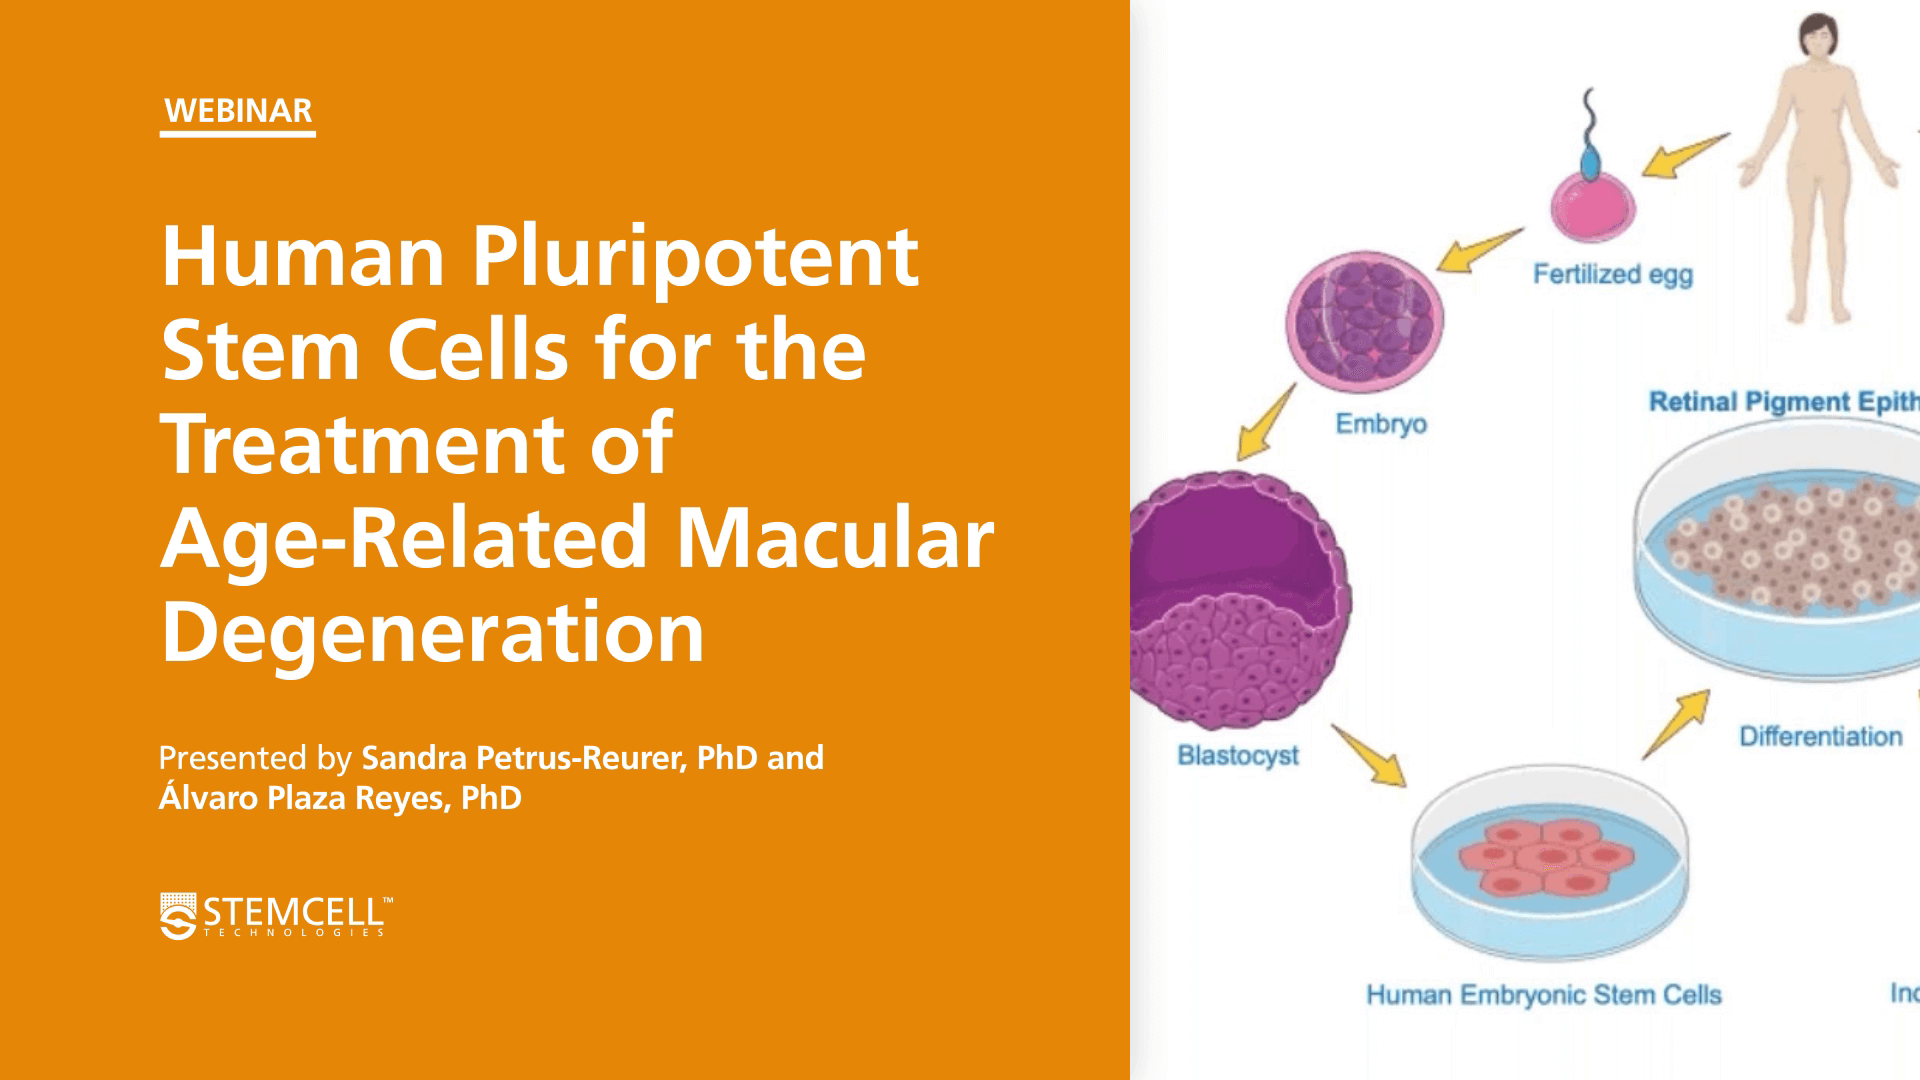 Human Pluripotent Stem Cells for the Treatment of Age-Related Macular Degeneration and Compliance Considerations for Clinical-Grade iPSCs